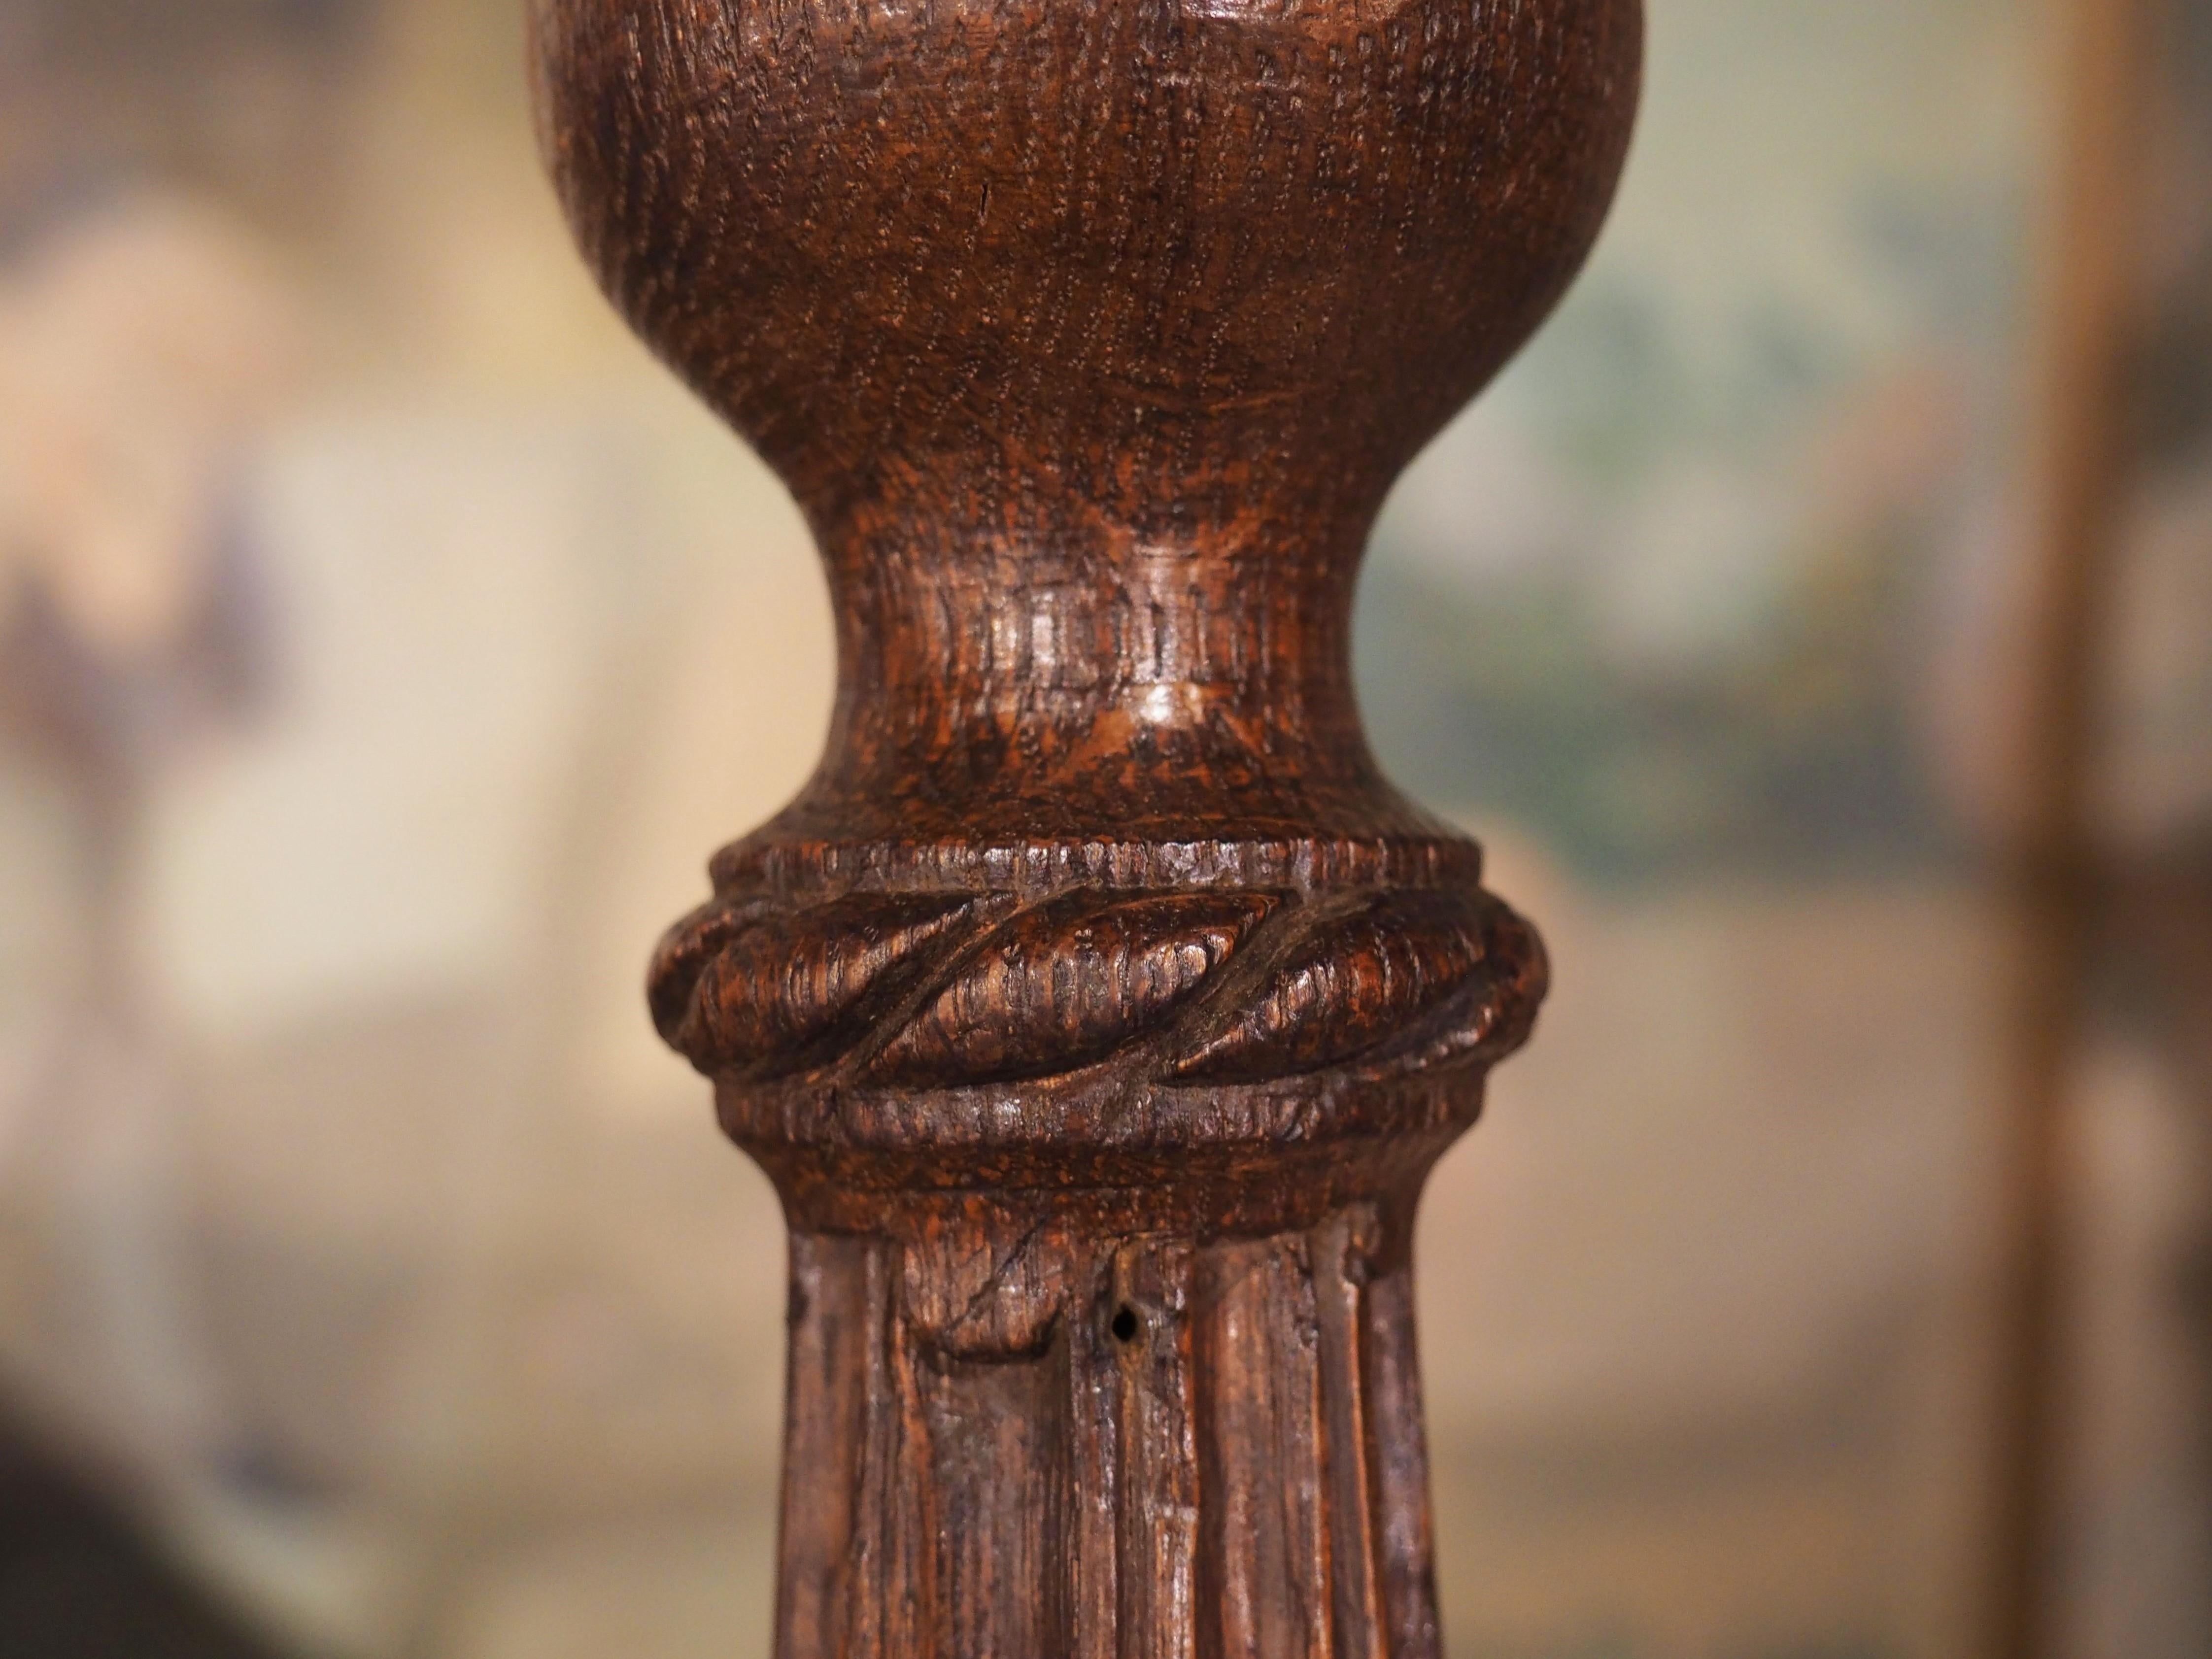 With its finely carved foliate motifs, this antique candlestick has an equally impressive rich, deep brown color from an unmatched patina. hand carved from oak in France in the late 1700s, the elegant candlestick sits on top of a tripartite base